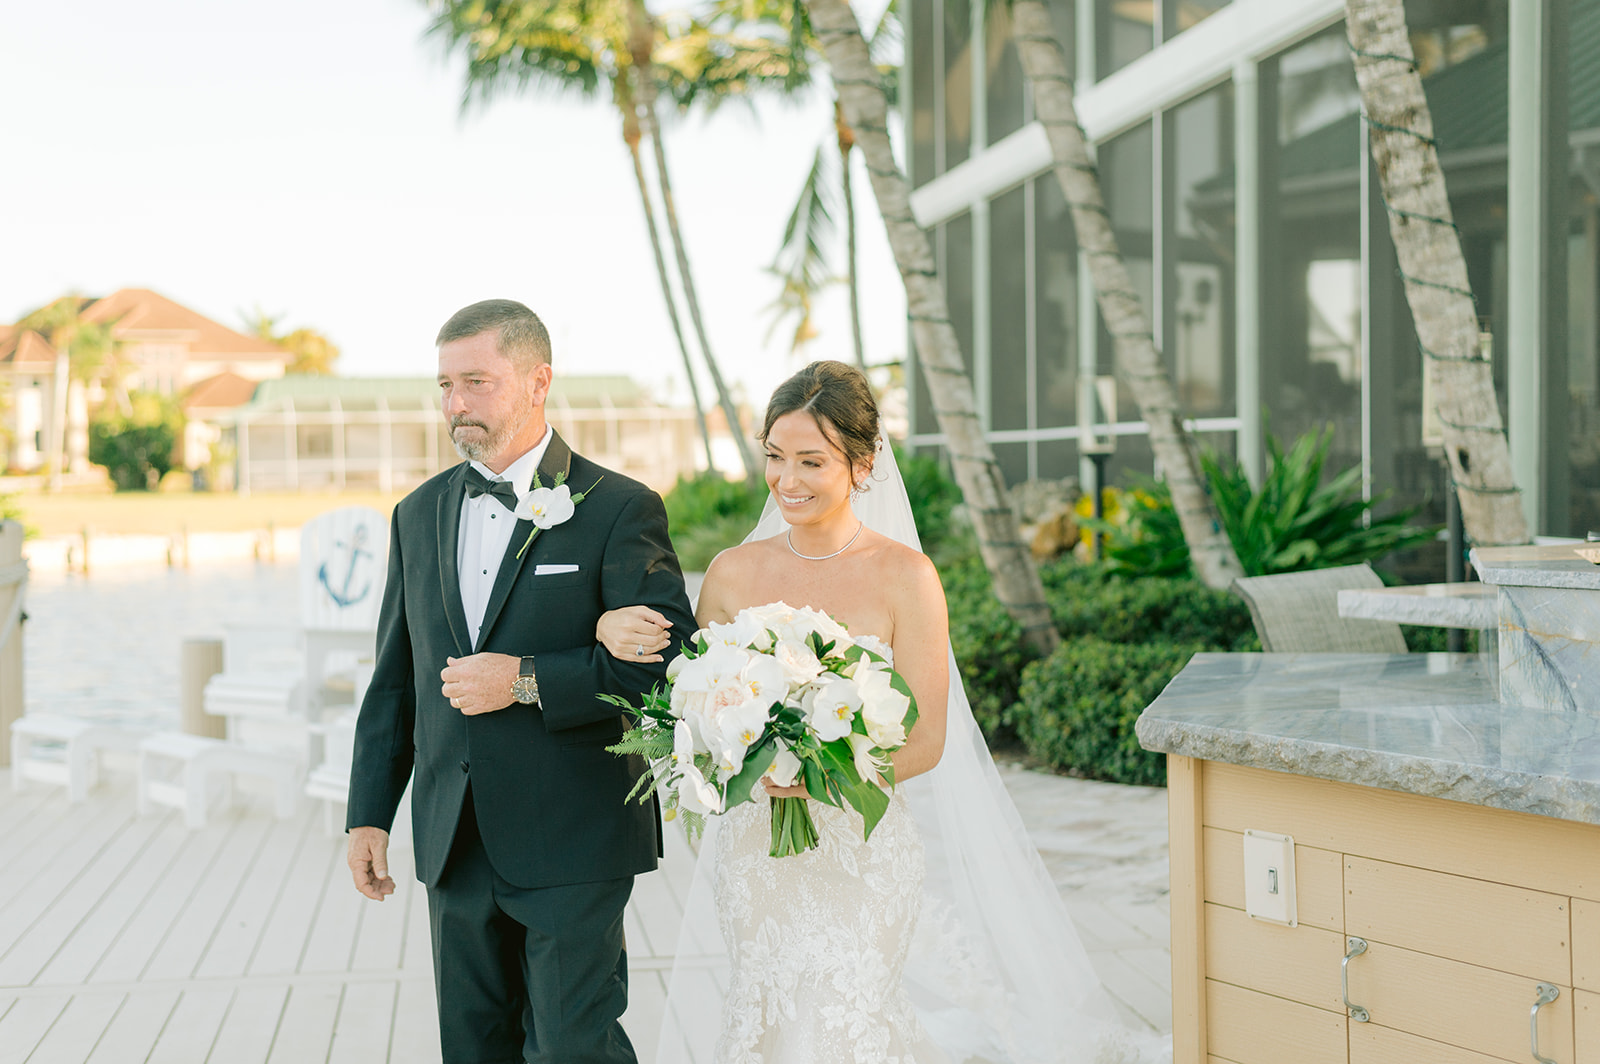 Experienced Marco Island Photographer for Your Wedding - Capturing Every Moment
